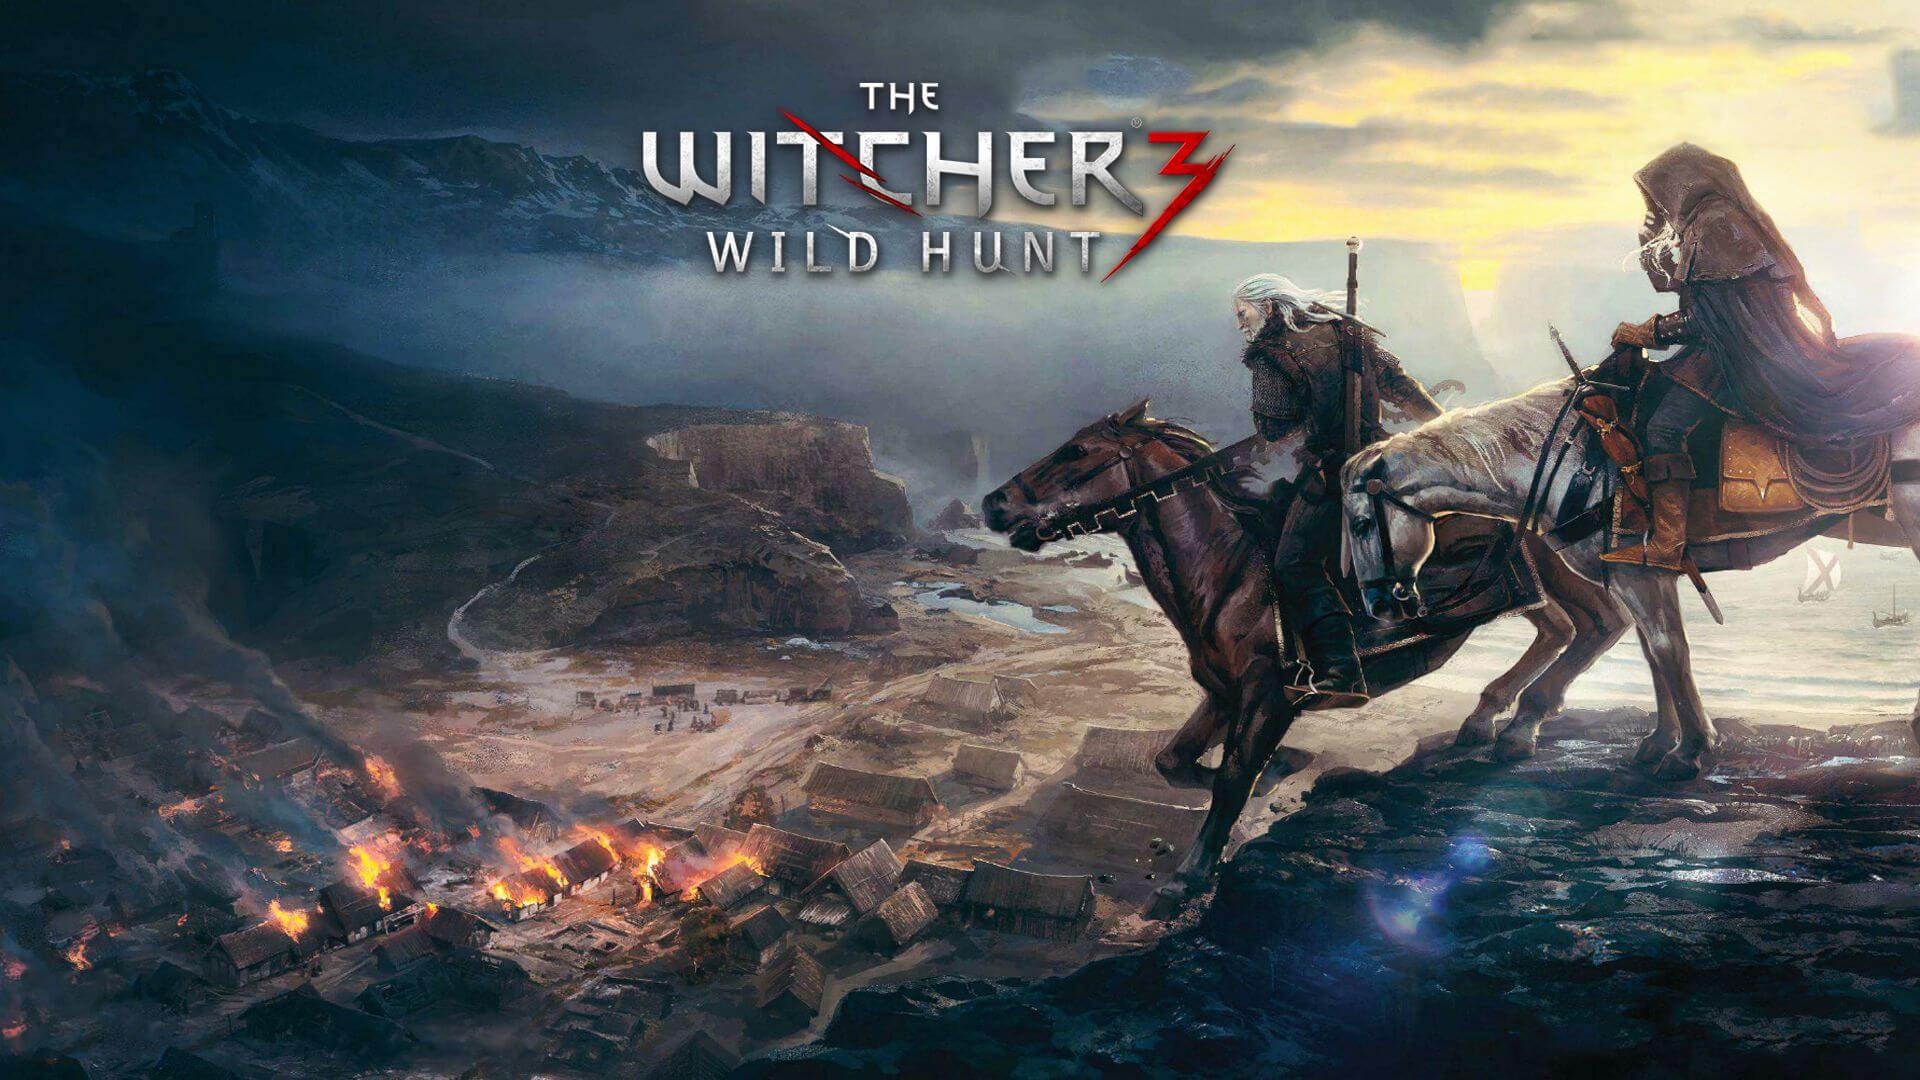 The Witcher hunt